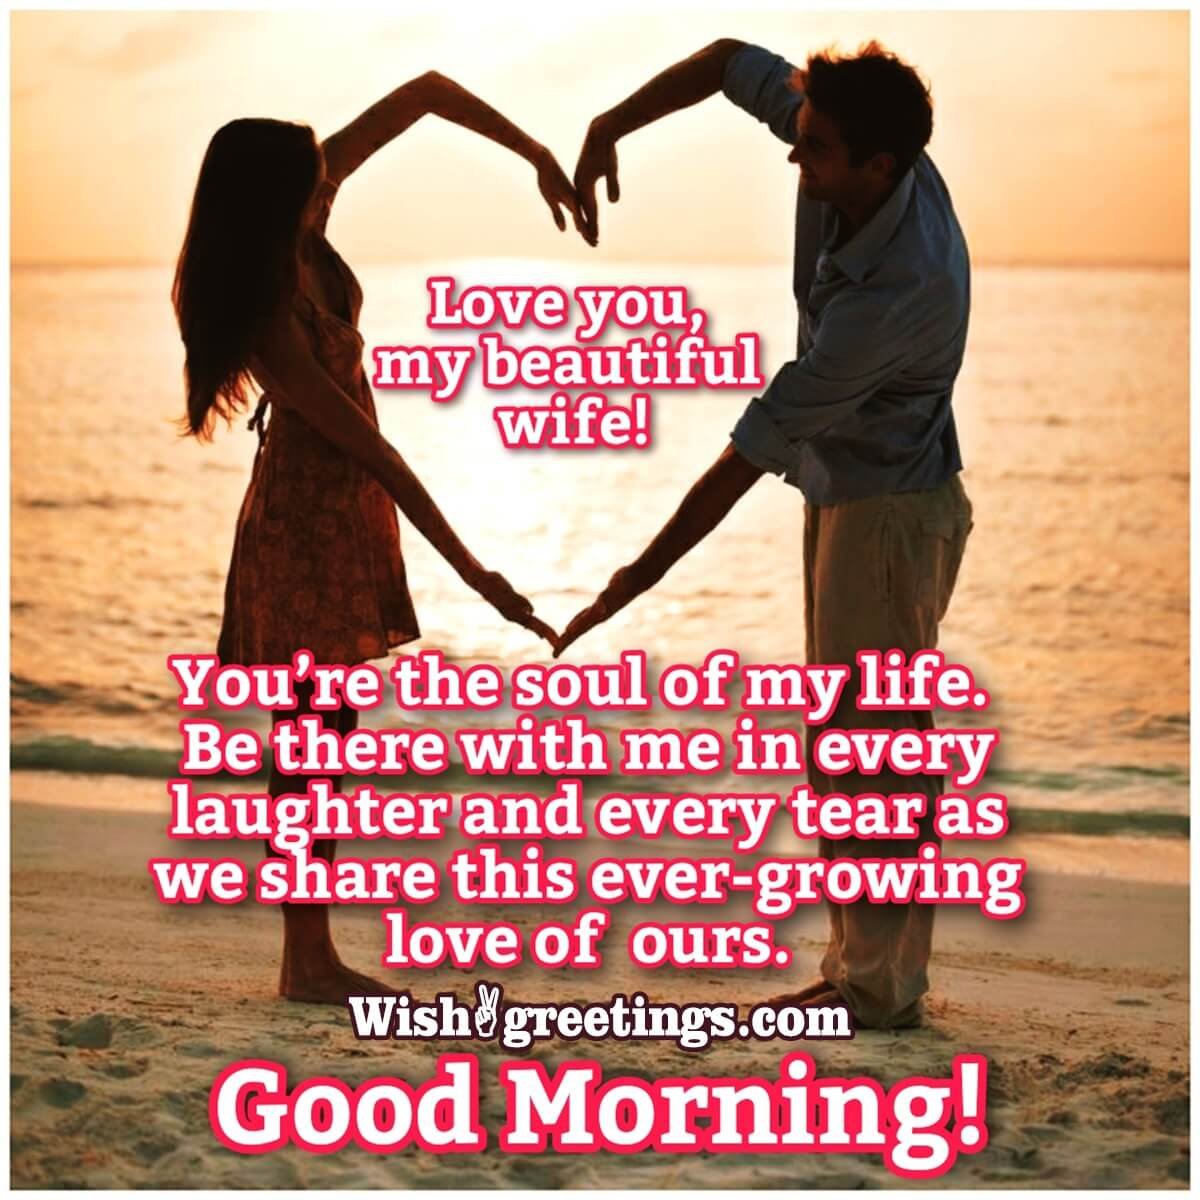 Buy > good morning my lovely wife > Very cheap -“><figcaption class=